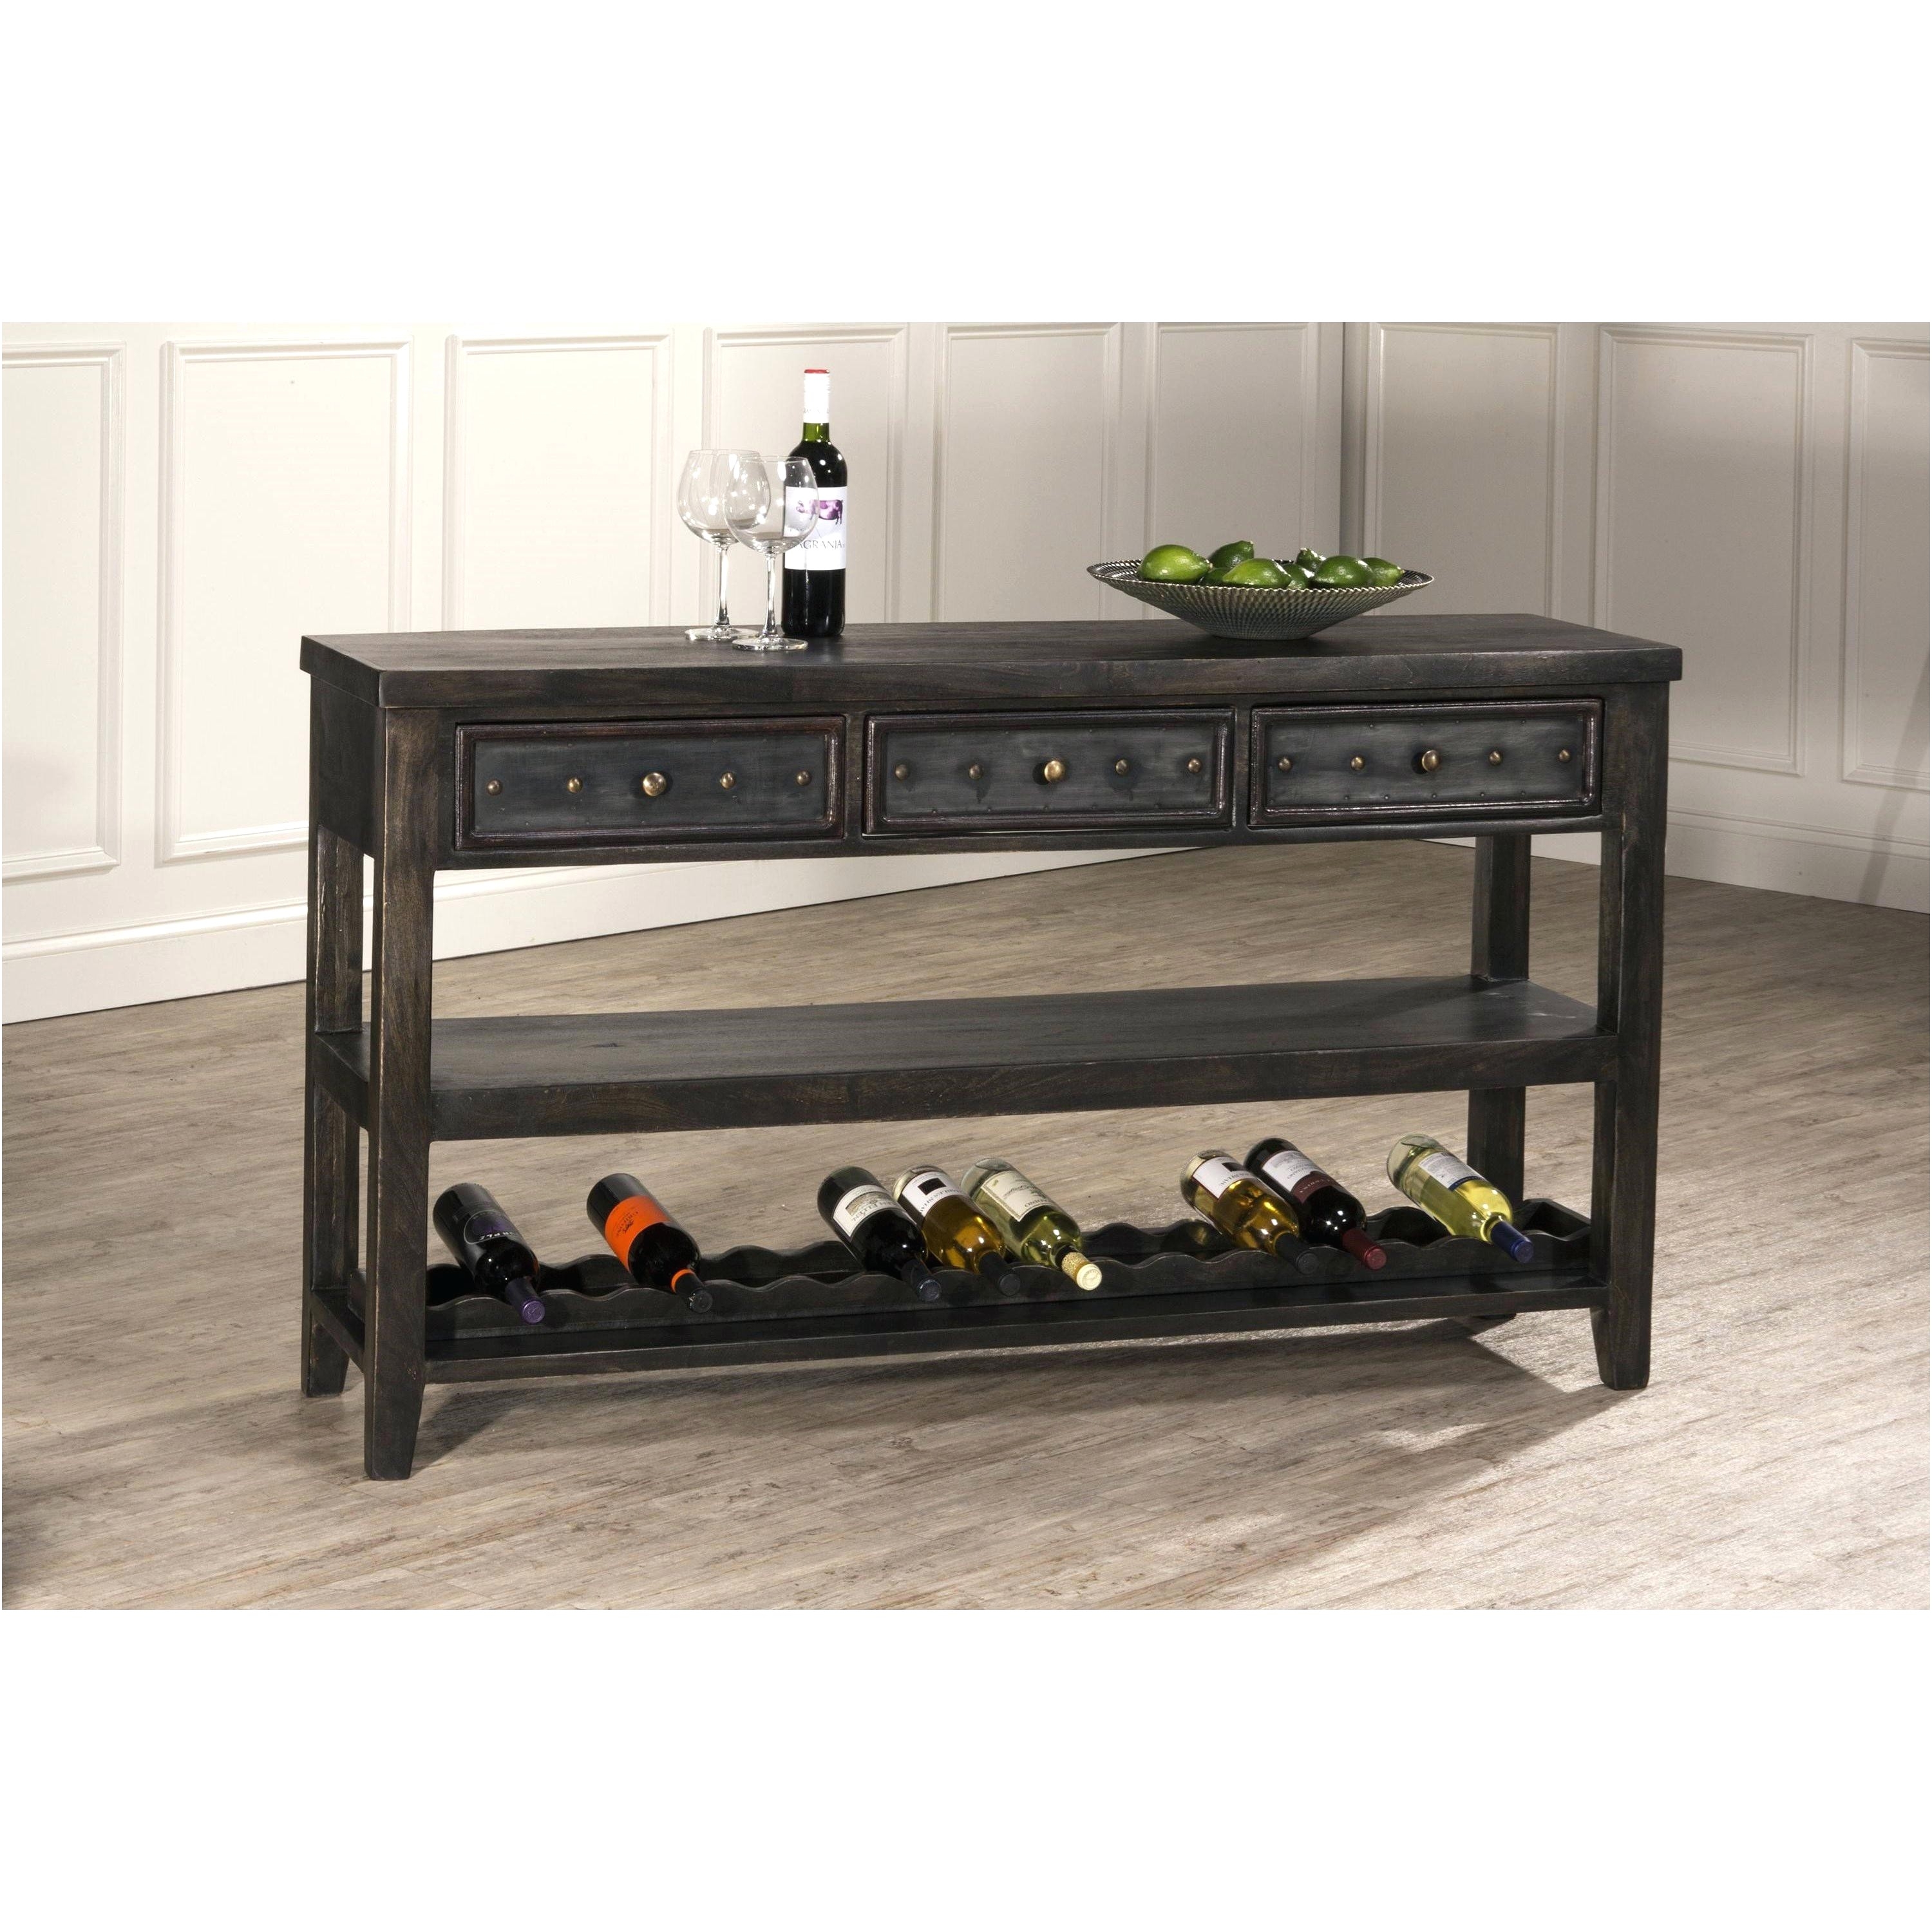 home design table with wine rack underneath fresh od o m242 mission oak stereo audio